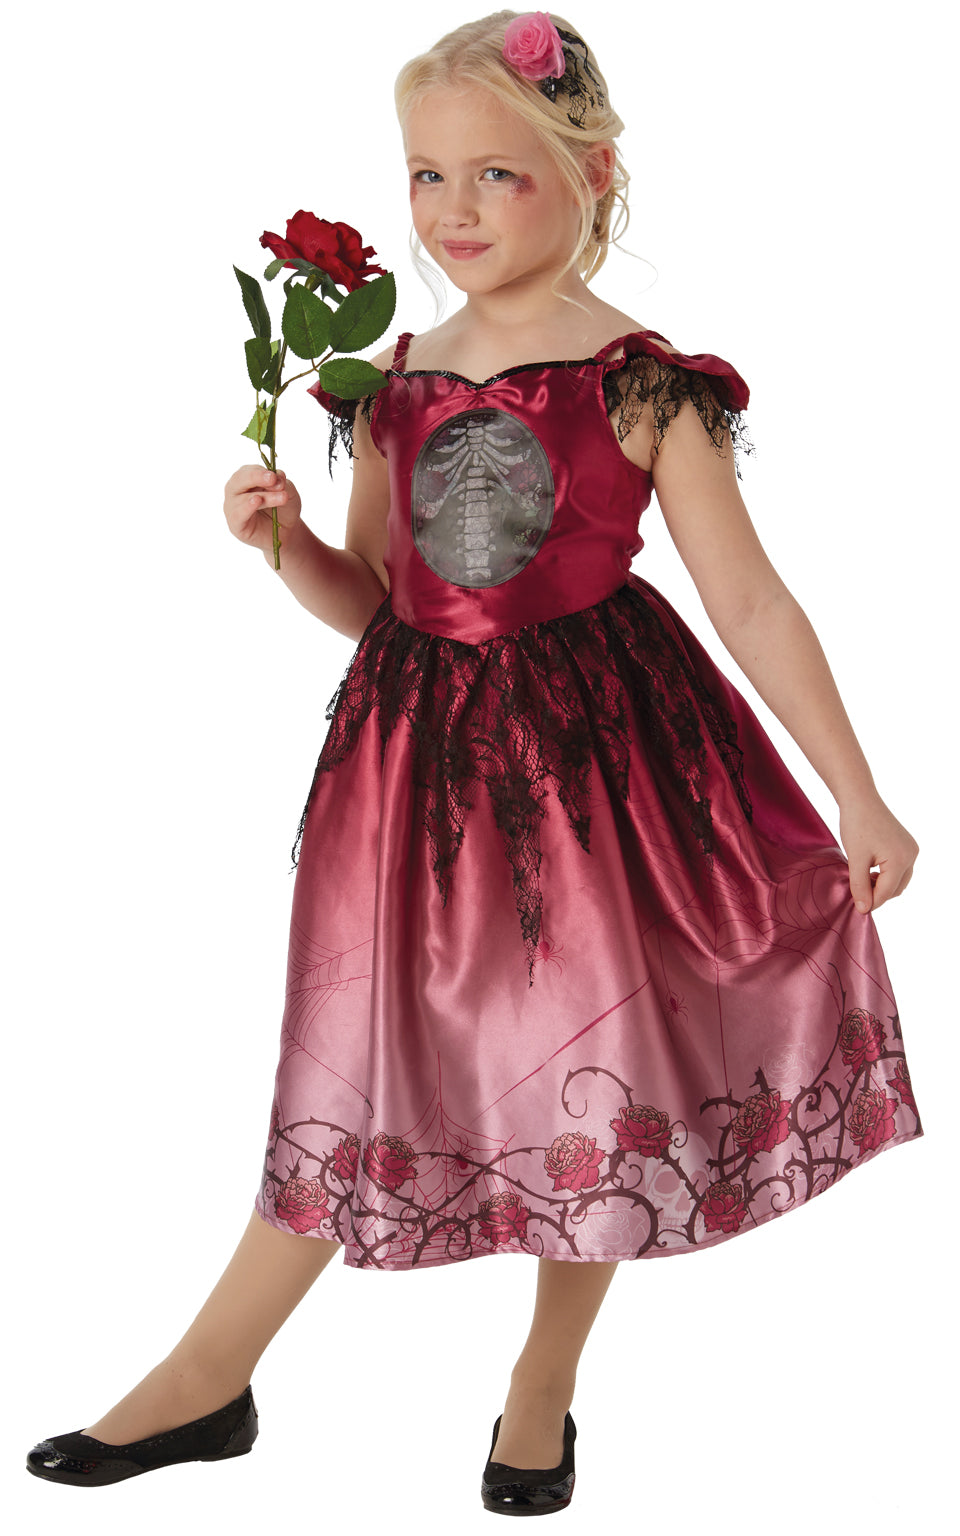 Rags & Roses Costume